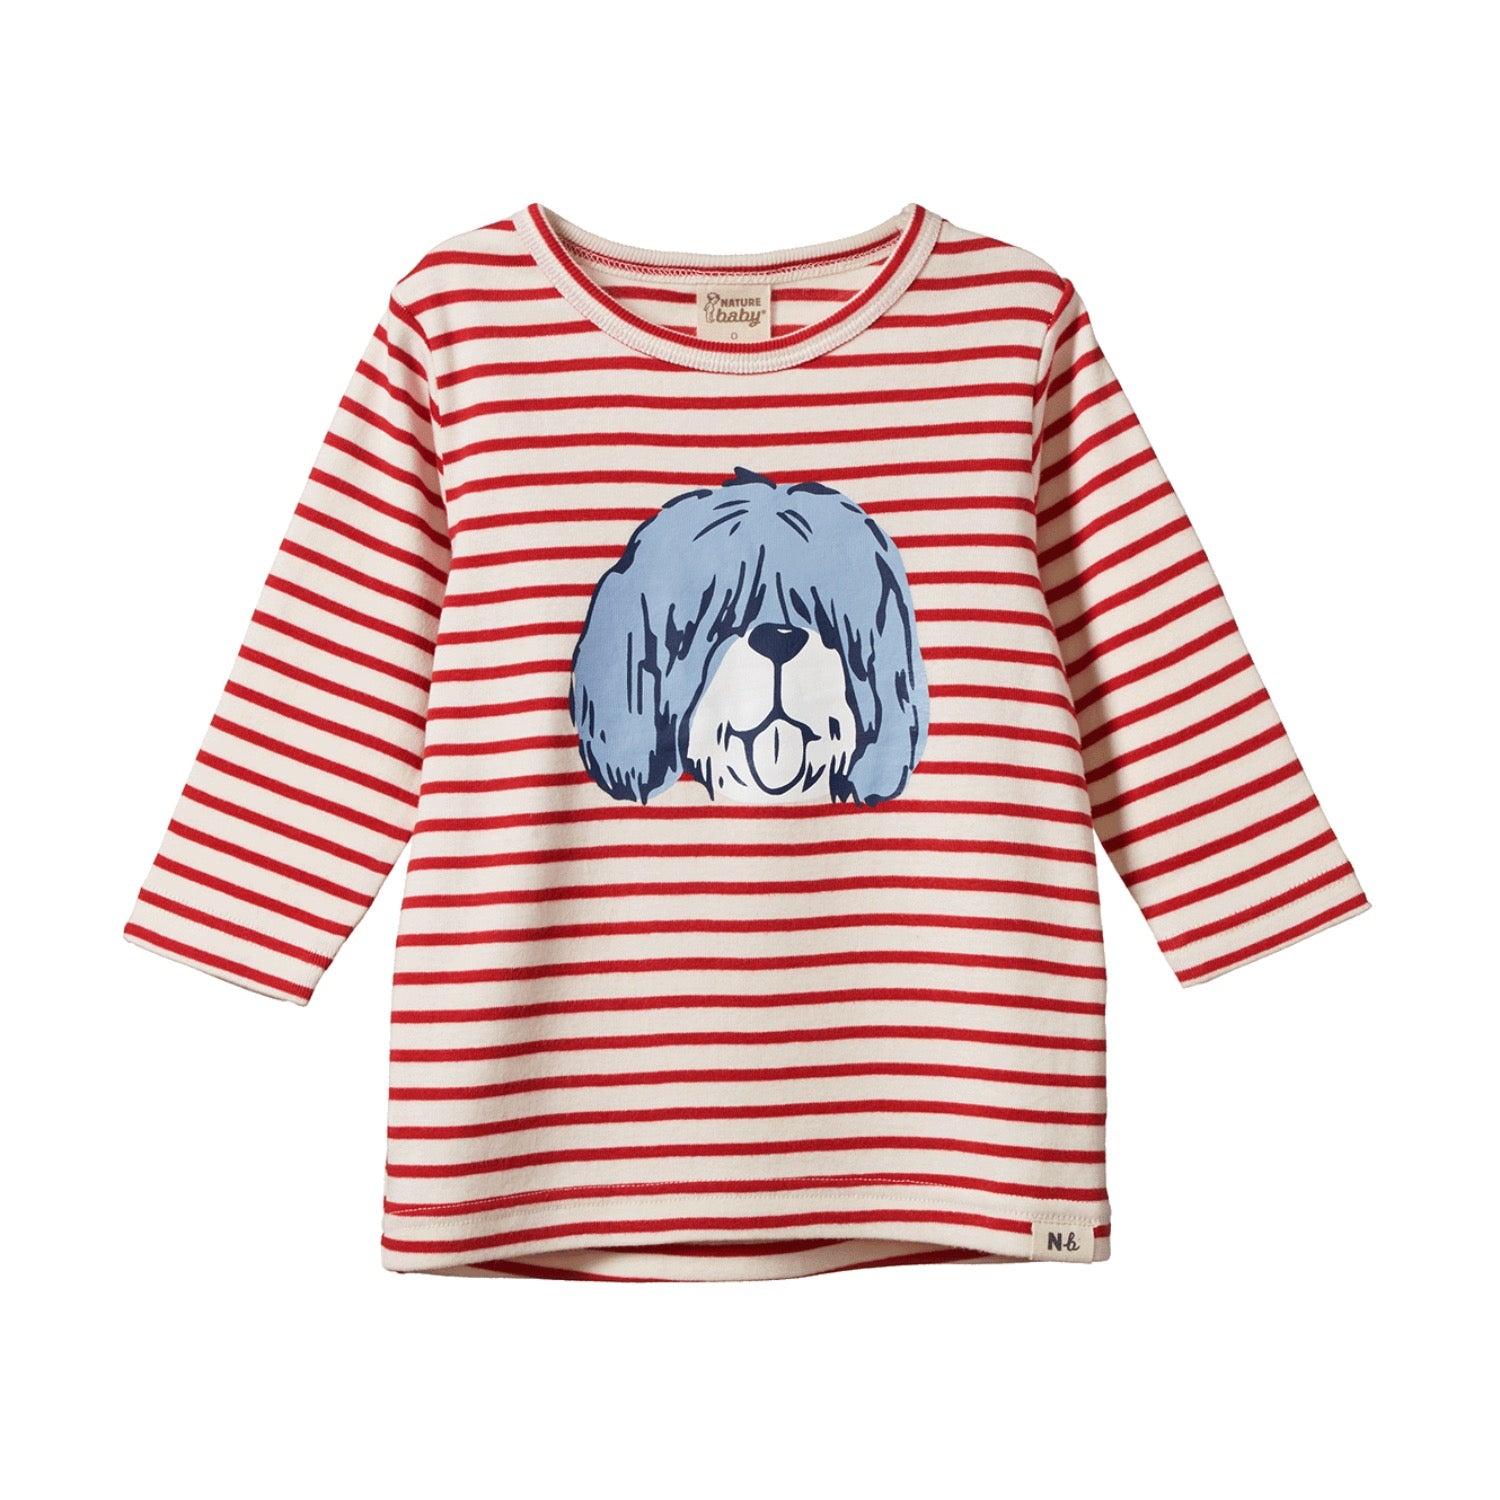 Nature Baby Long Sleeve River Tee Dog Days Red Sailor Stripe